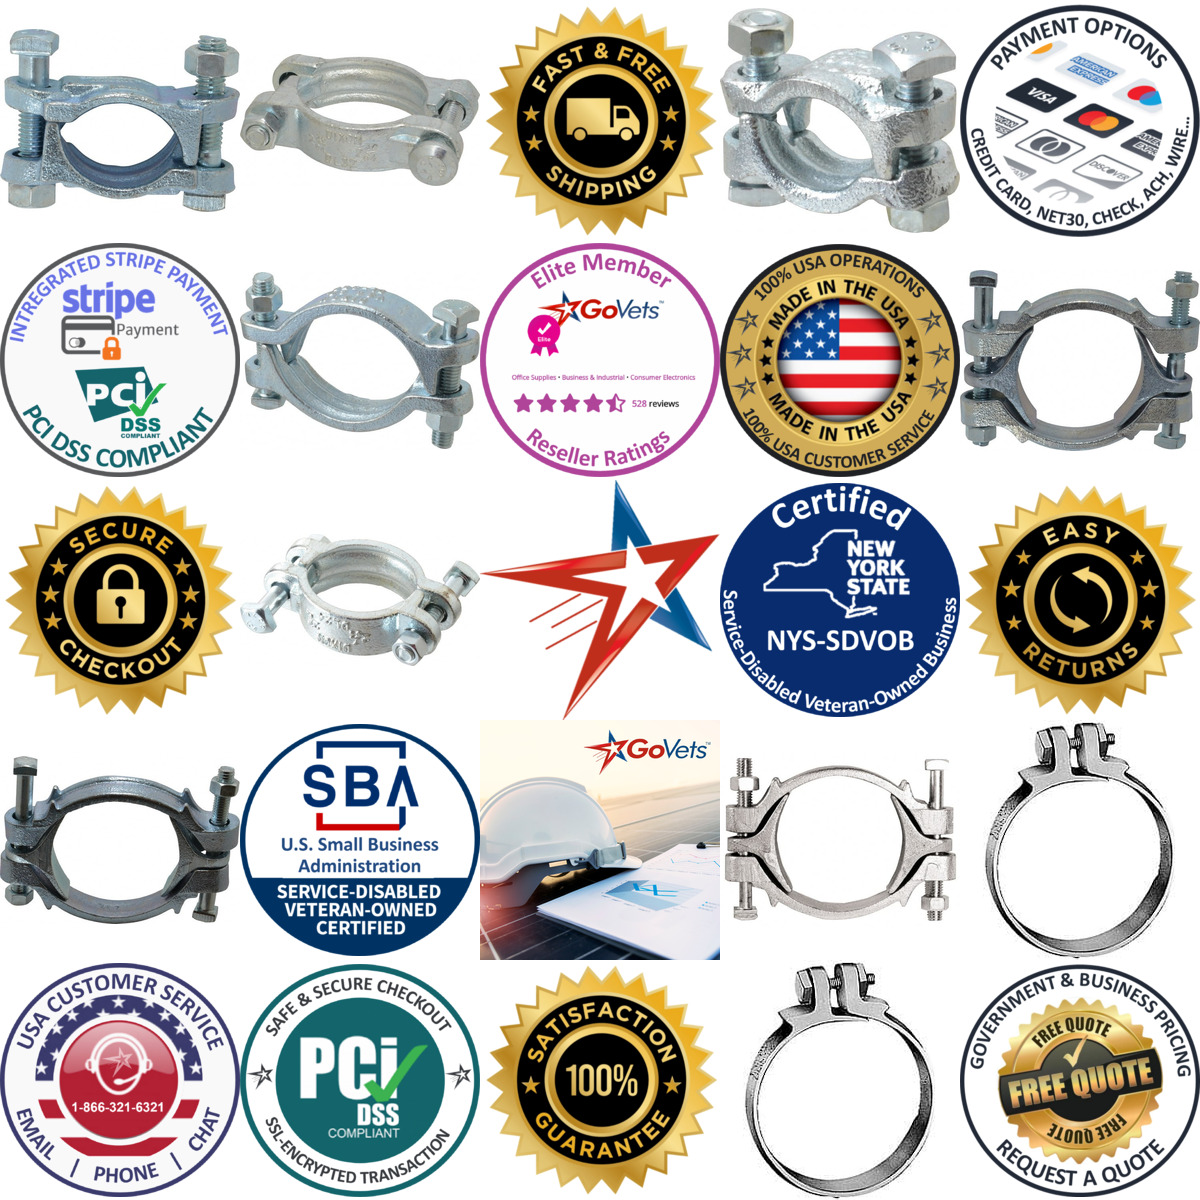 A selection of Iron Clamps products on GoVets